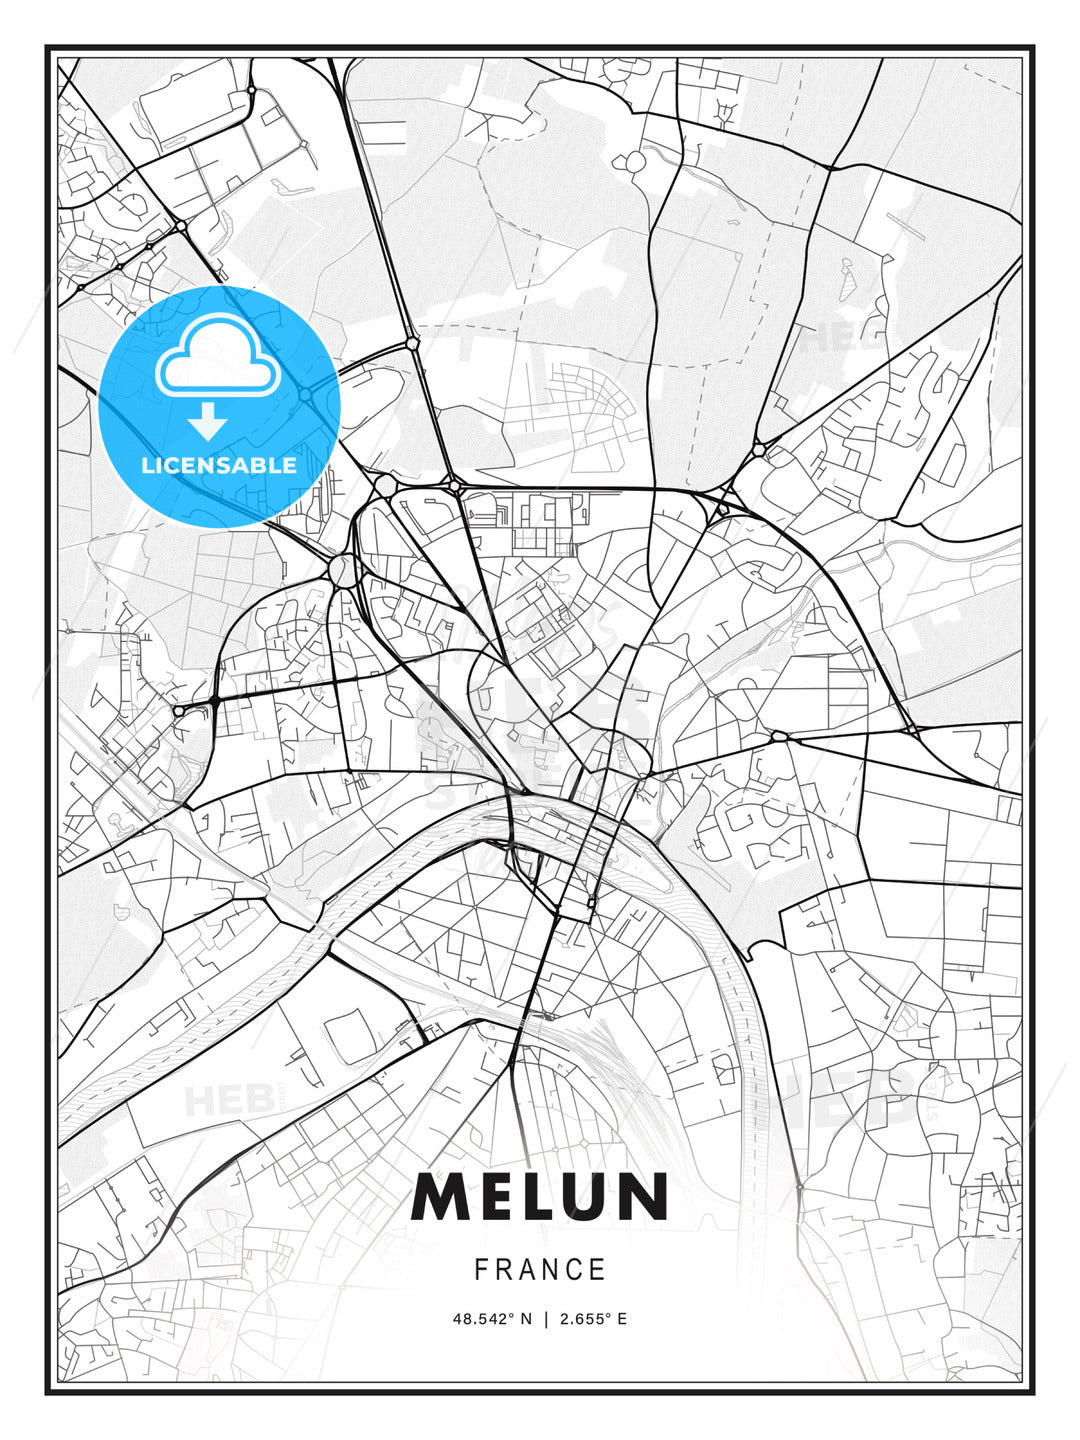 Melun, France, Modern Print Template in Various Formats - HEBSTREITS Sketches